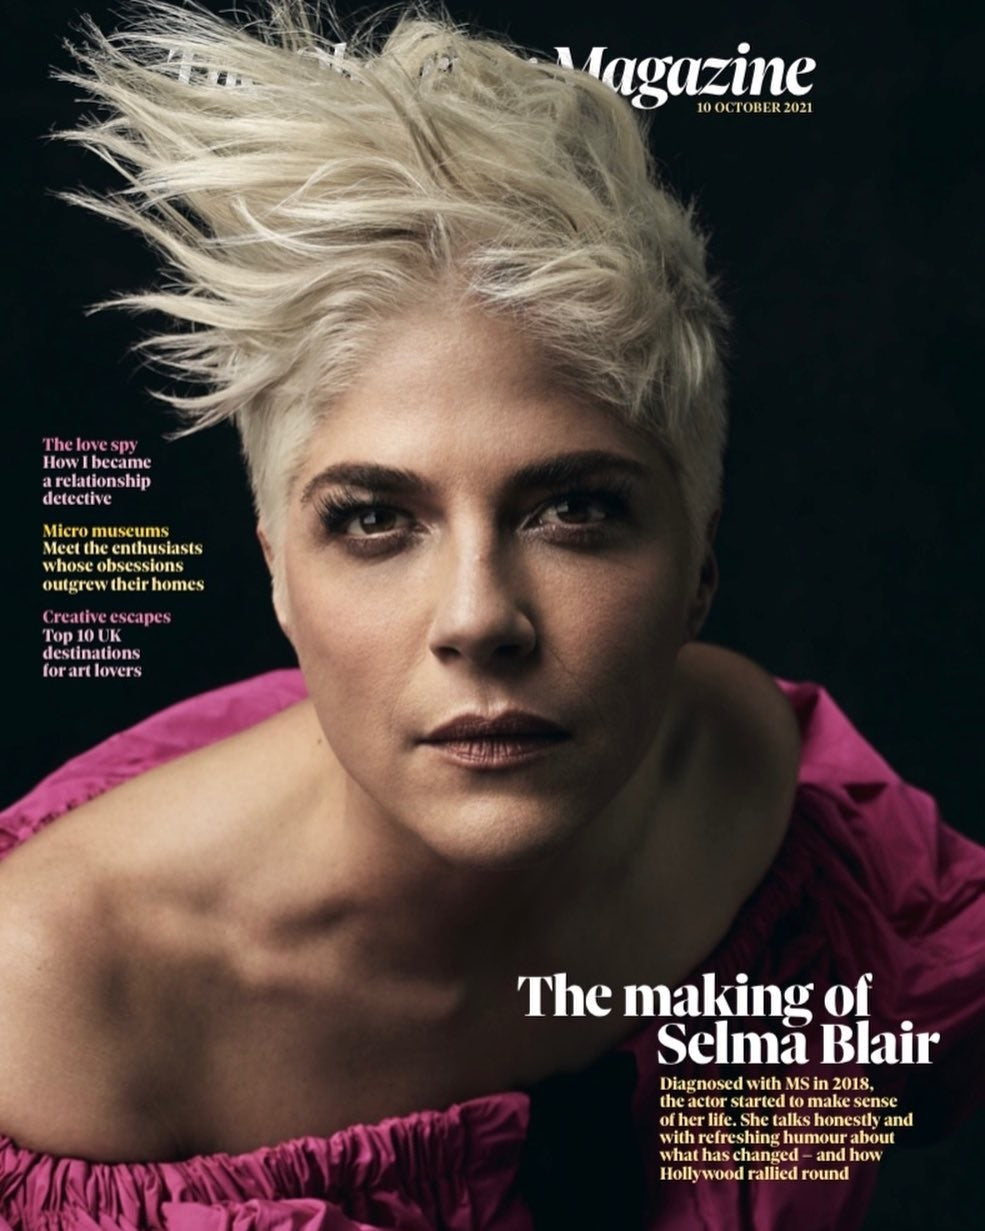 OBSERVER Magazine October 2021: SELMA BLAIR COVER FEATURE